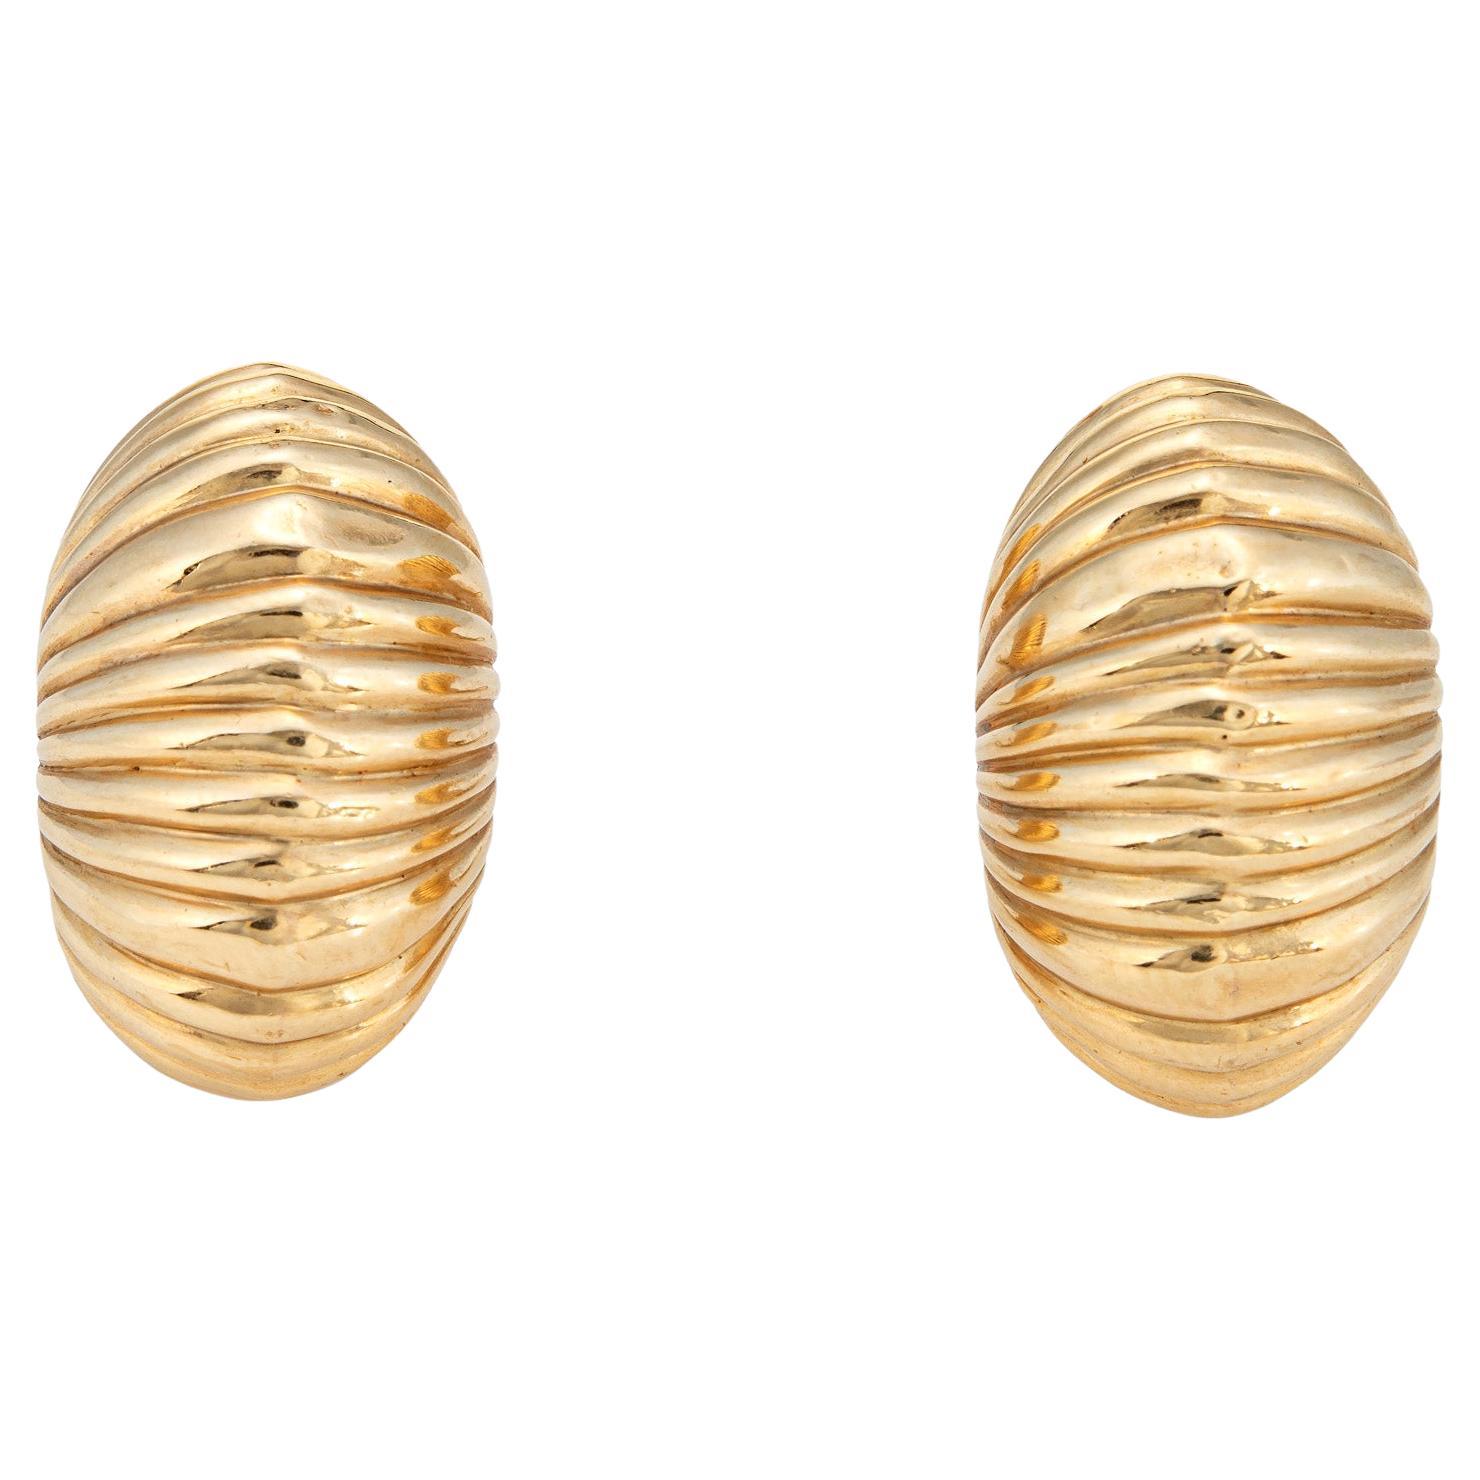 Vintage Cartier Earrings c1945 Bombe Fluted Dome 14k Gold Shell Fine Jewelry For Sale